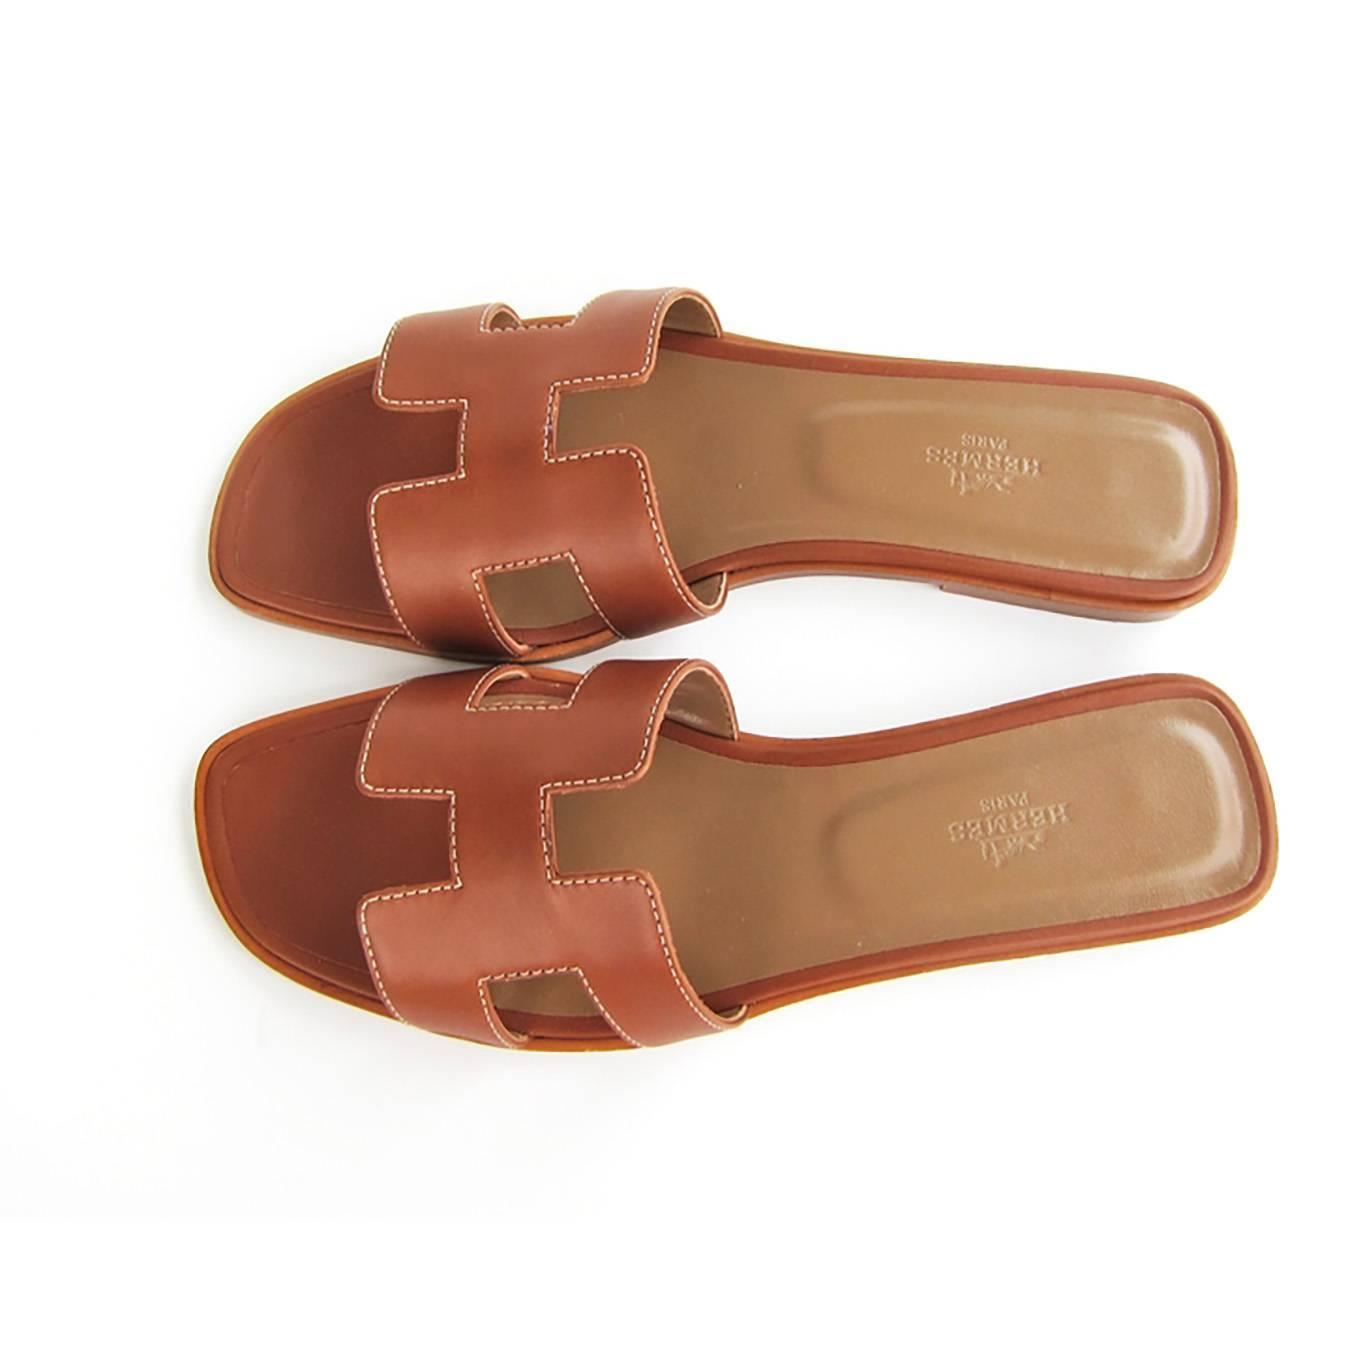 Hermes Gold Oran Box Leather Sandals Shoes Size 40 or 3.9 Iconic at 1stdibs